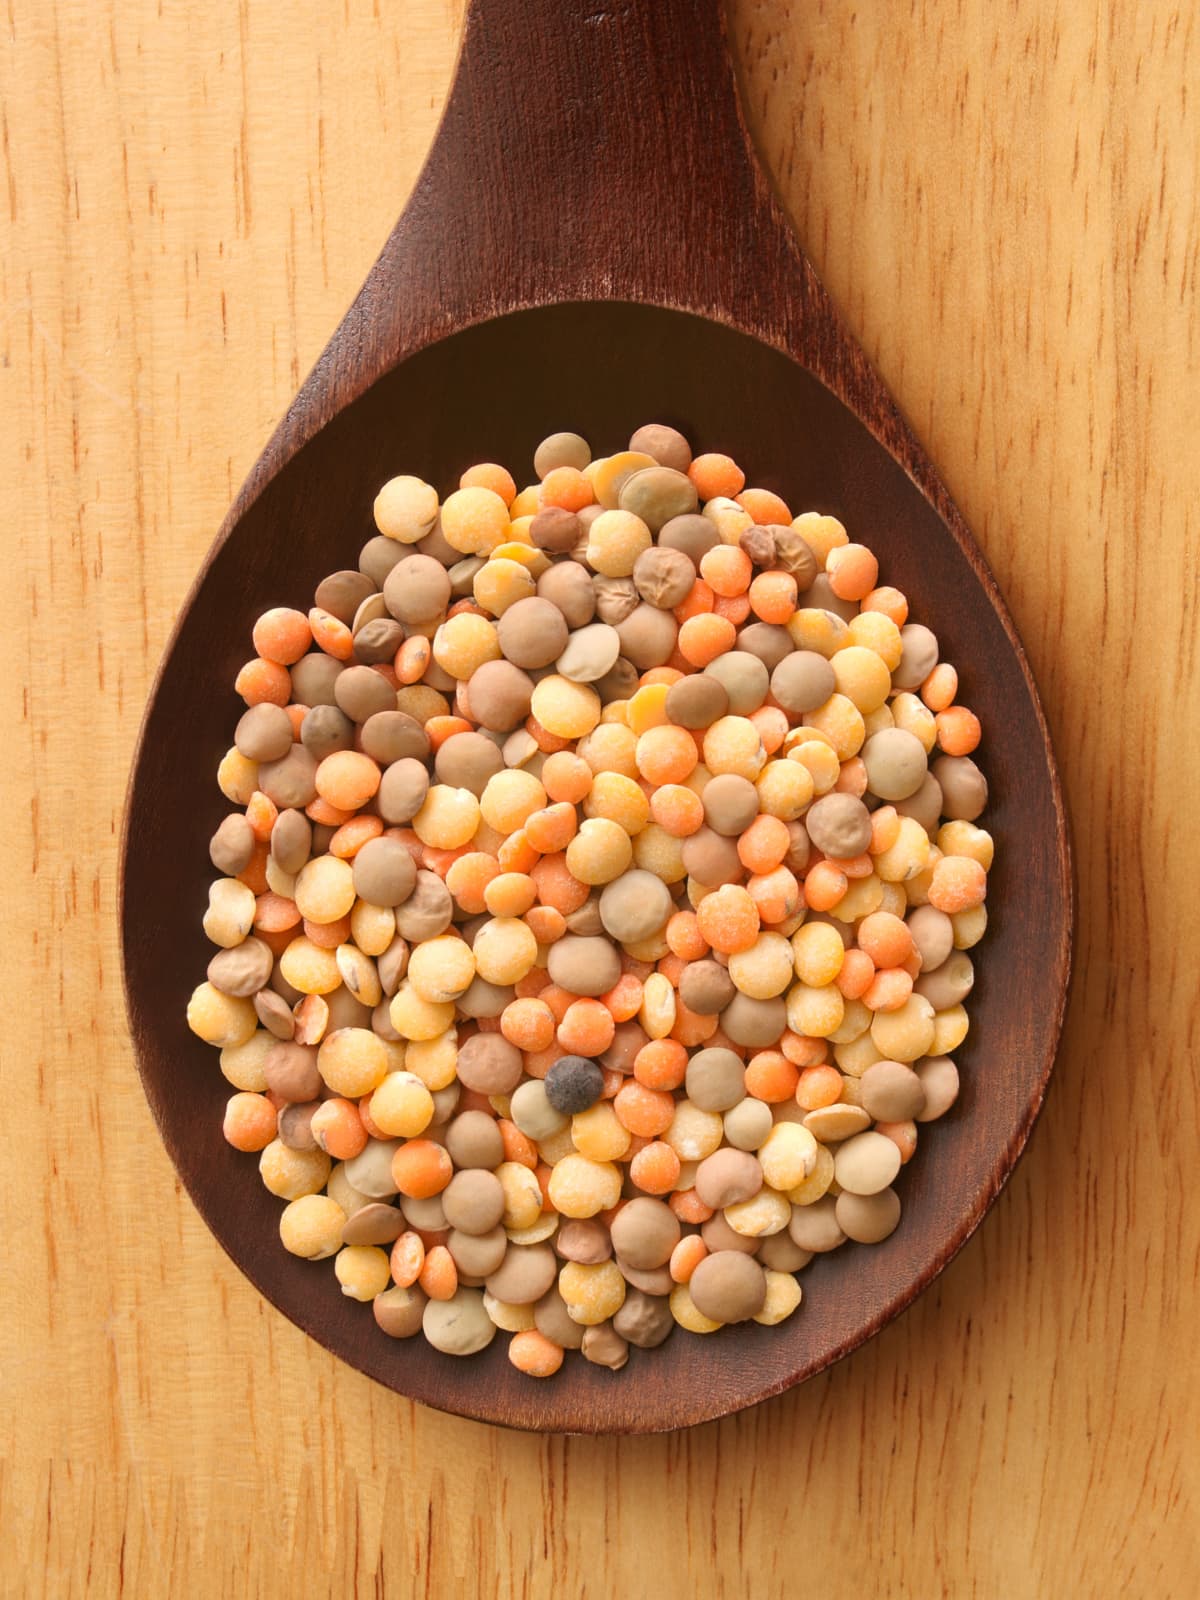 Top view of wooden spoon with mix of raw lentils on it